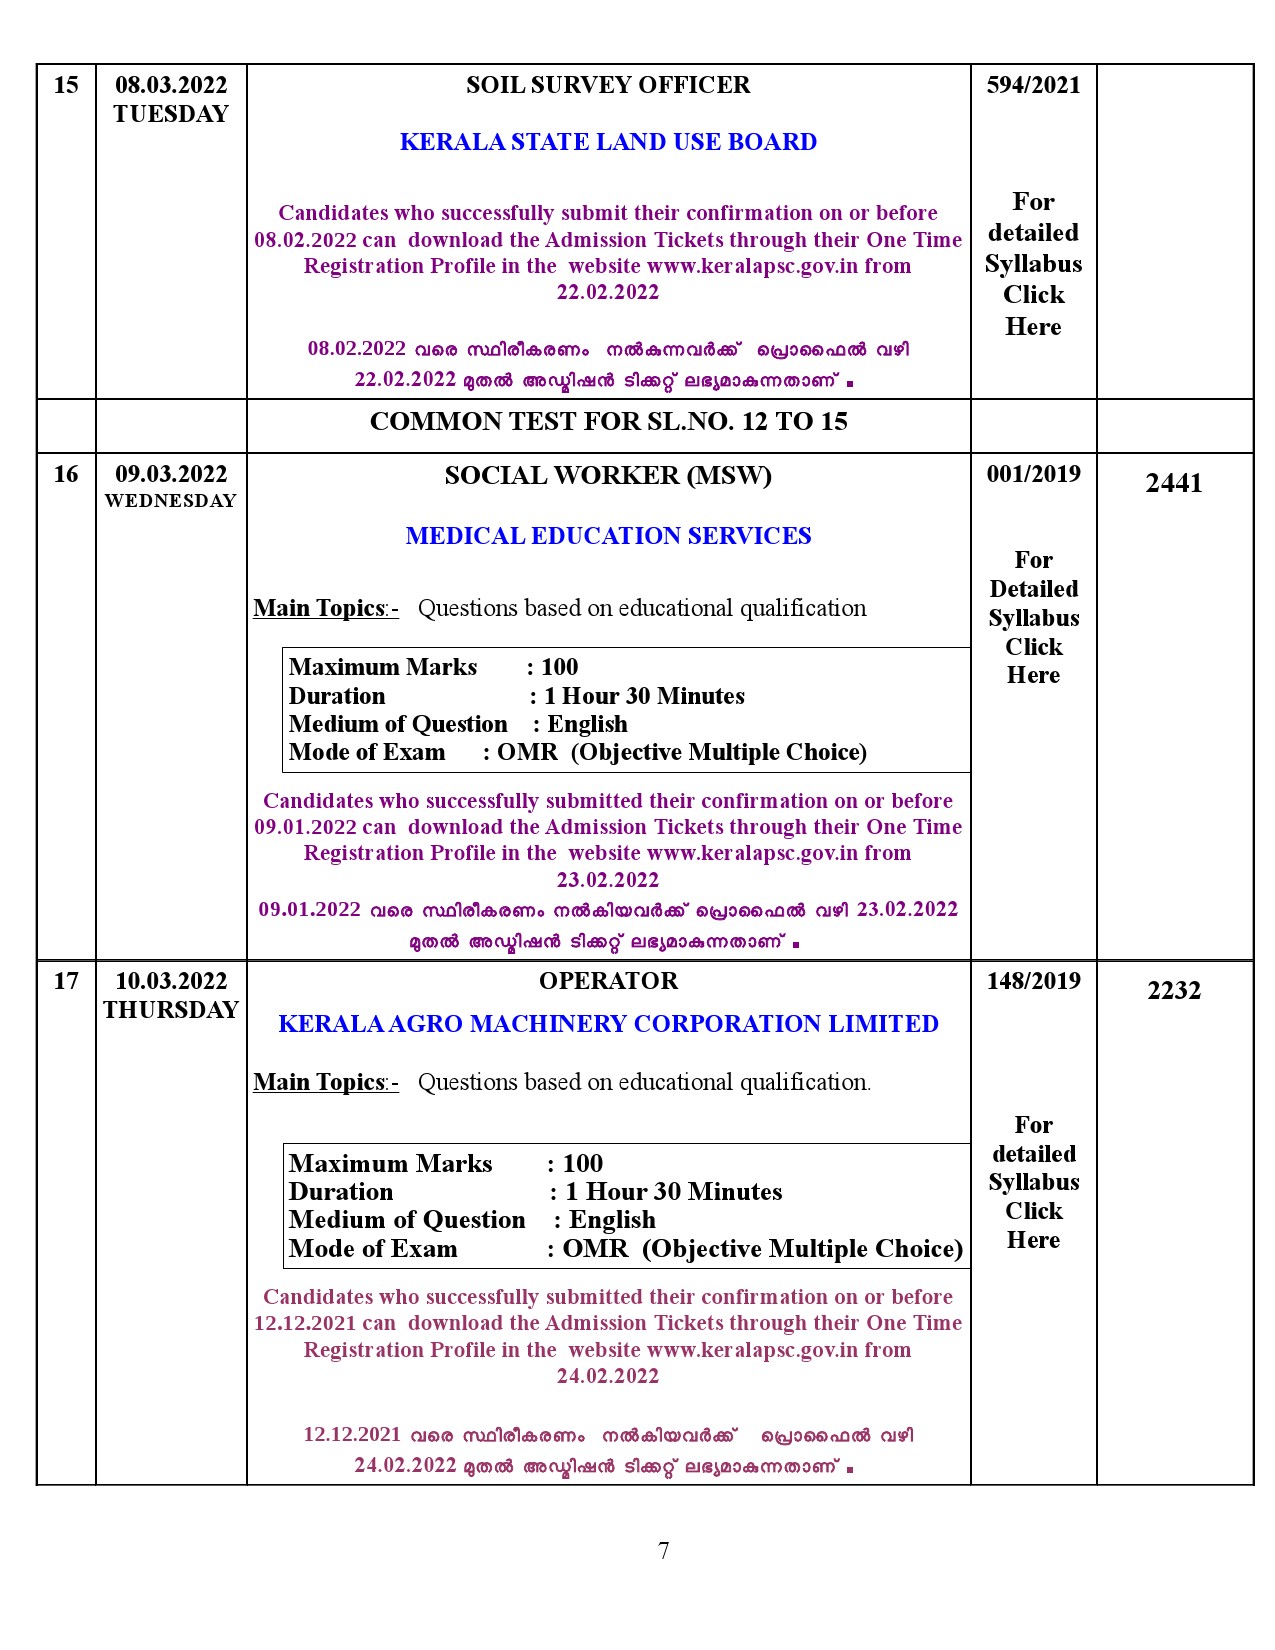 Modified Examination Programme For The Month Of March 2022 - Notification Image 7